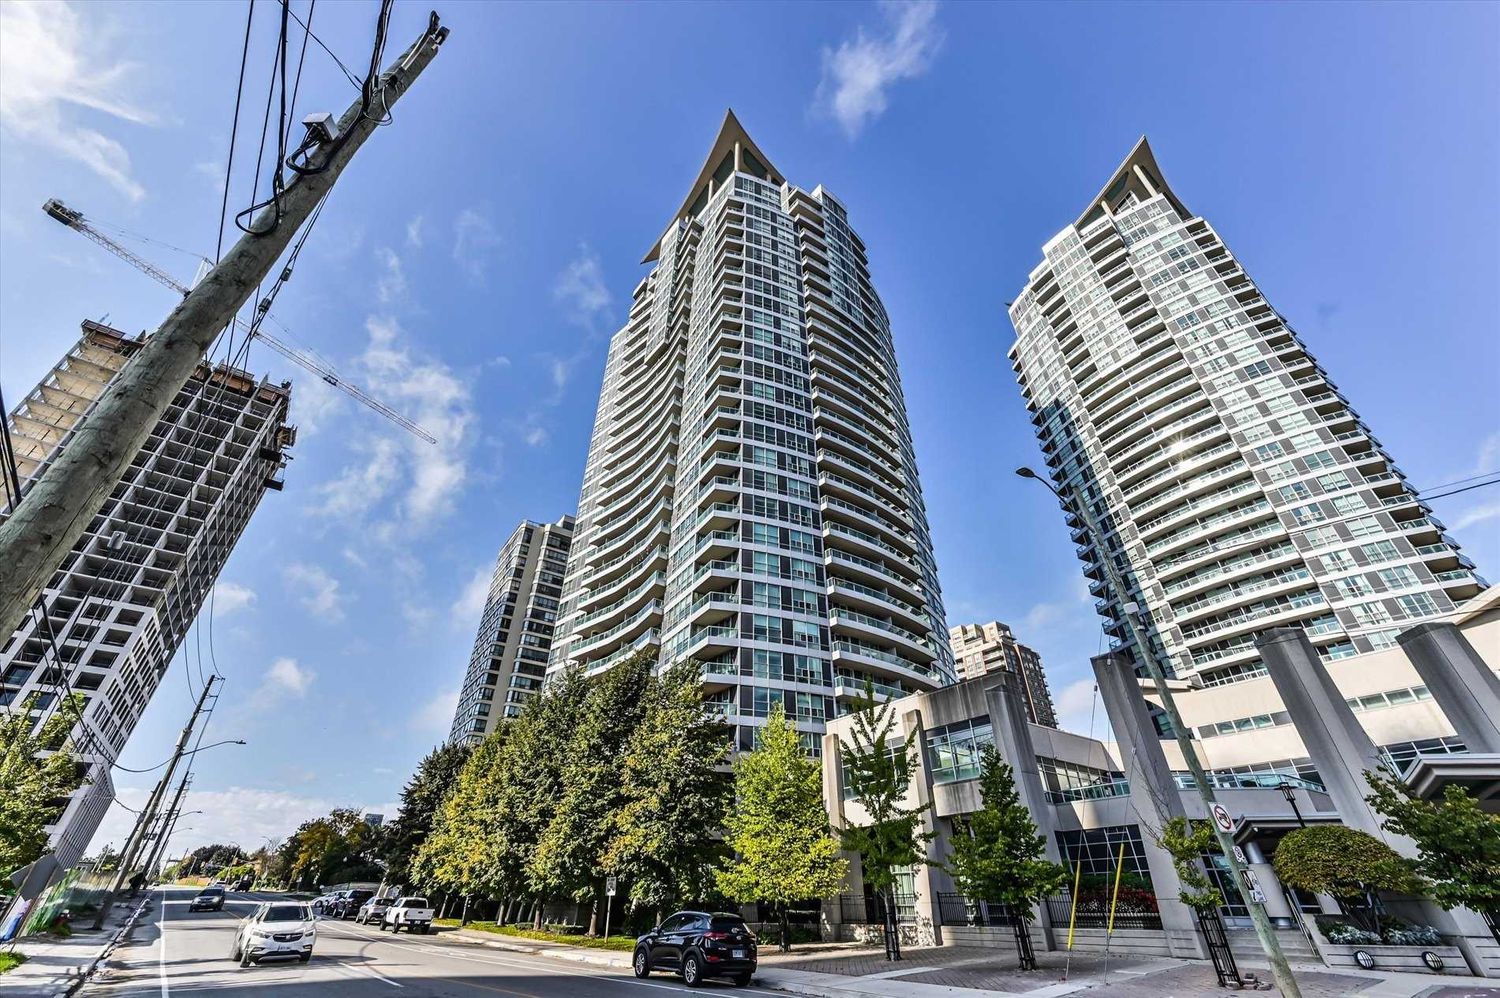 33 Elm Drive W. No 1 City Center Condos is located in  Mississauga, Toronto - image #2 of 2